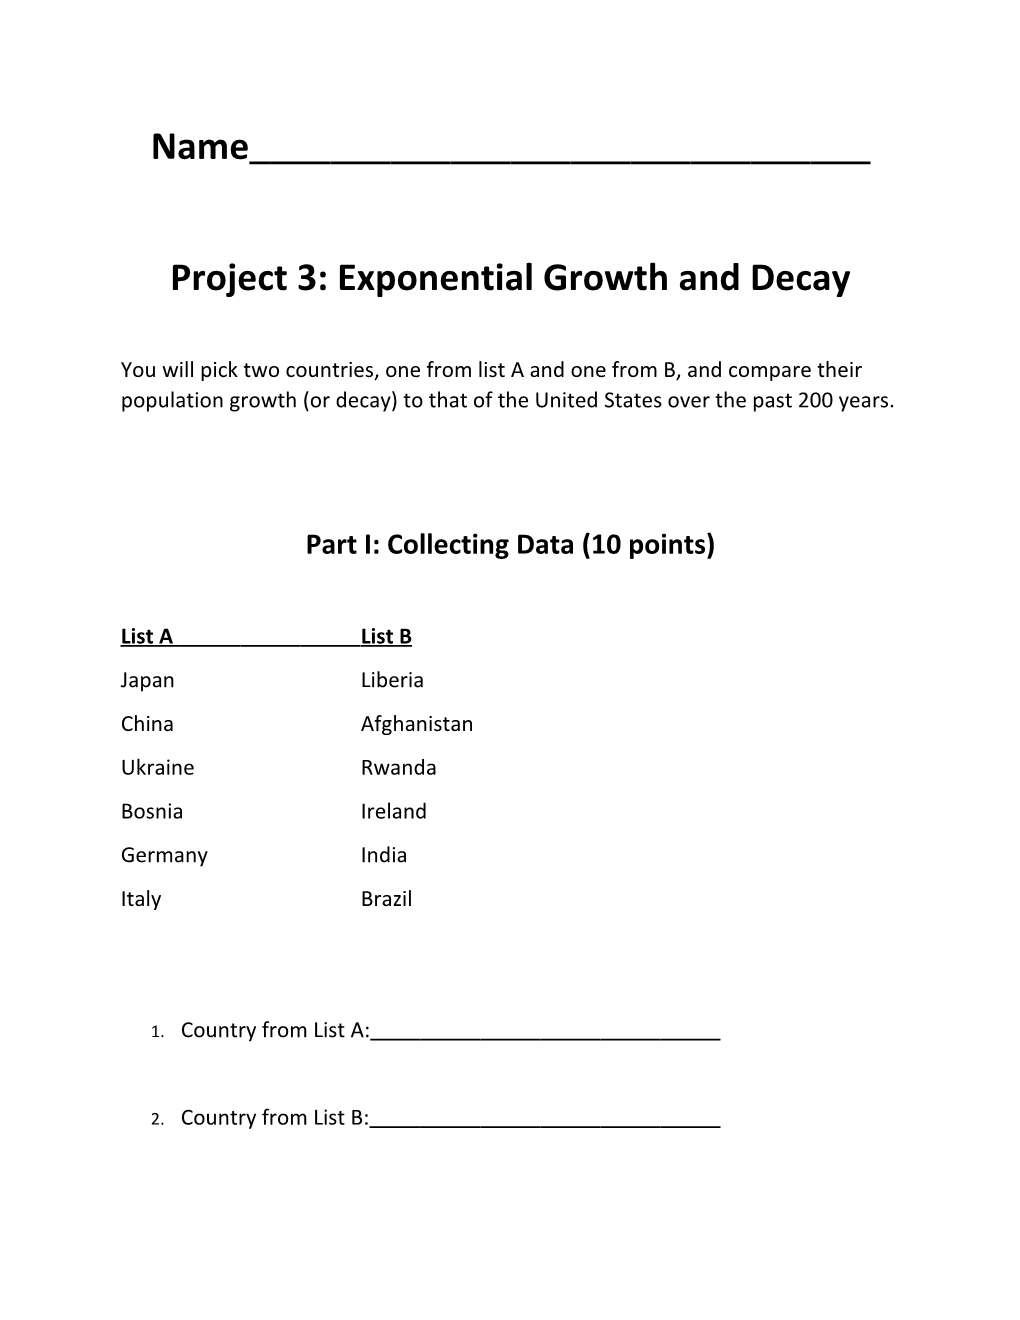 Project 3: Exponential Growth and Decay